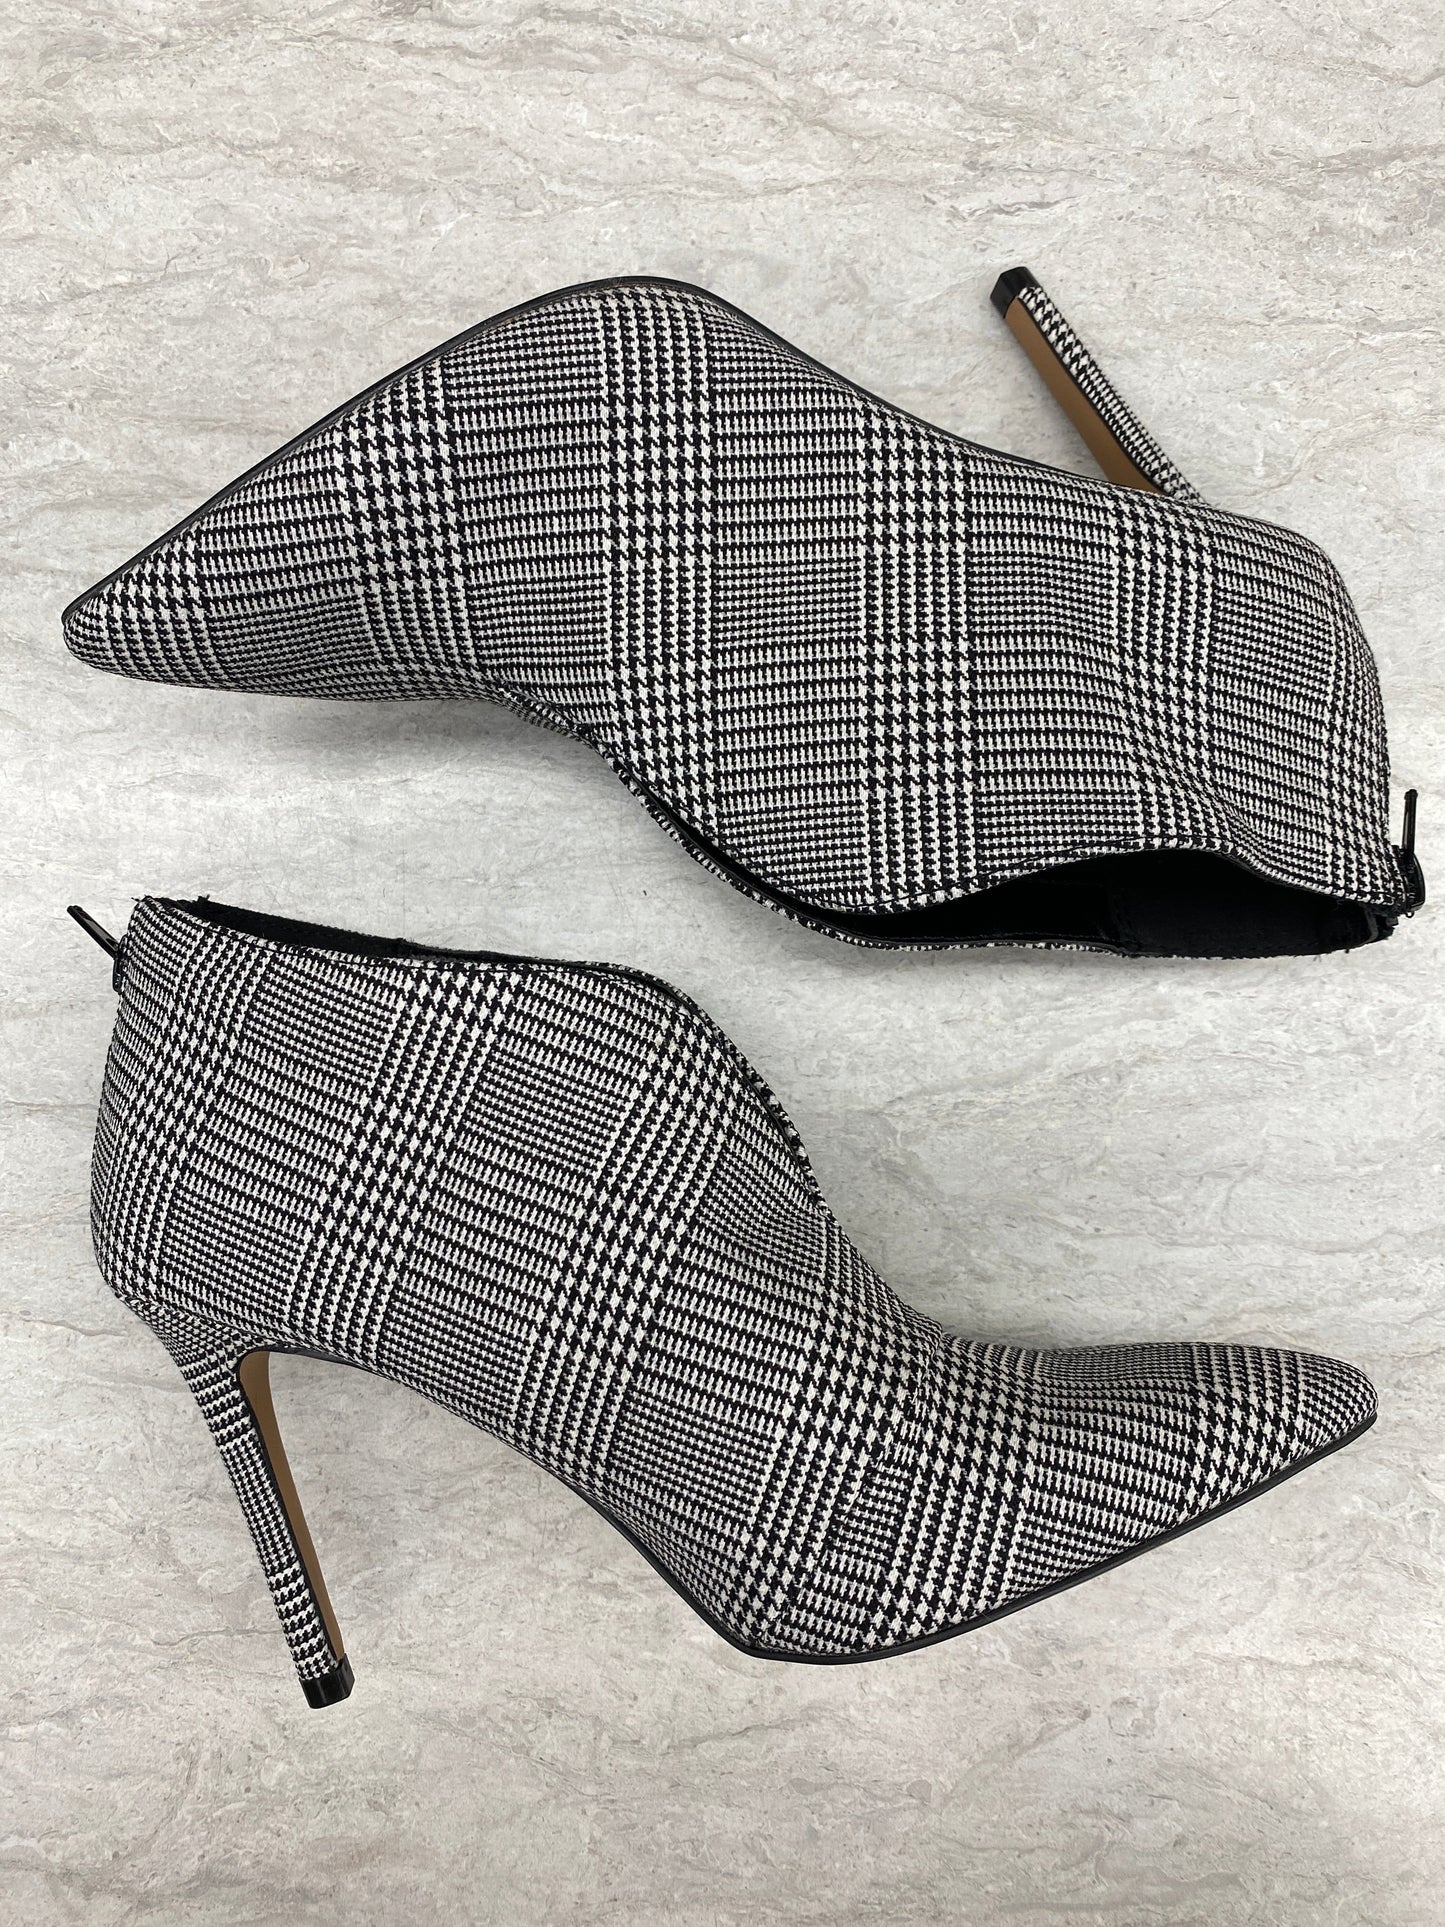 Shoes Heels Stiletto By New York And Co  Size: 8